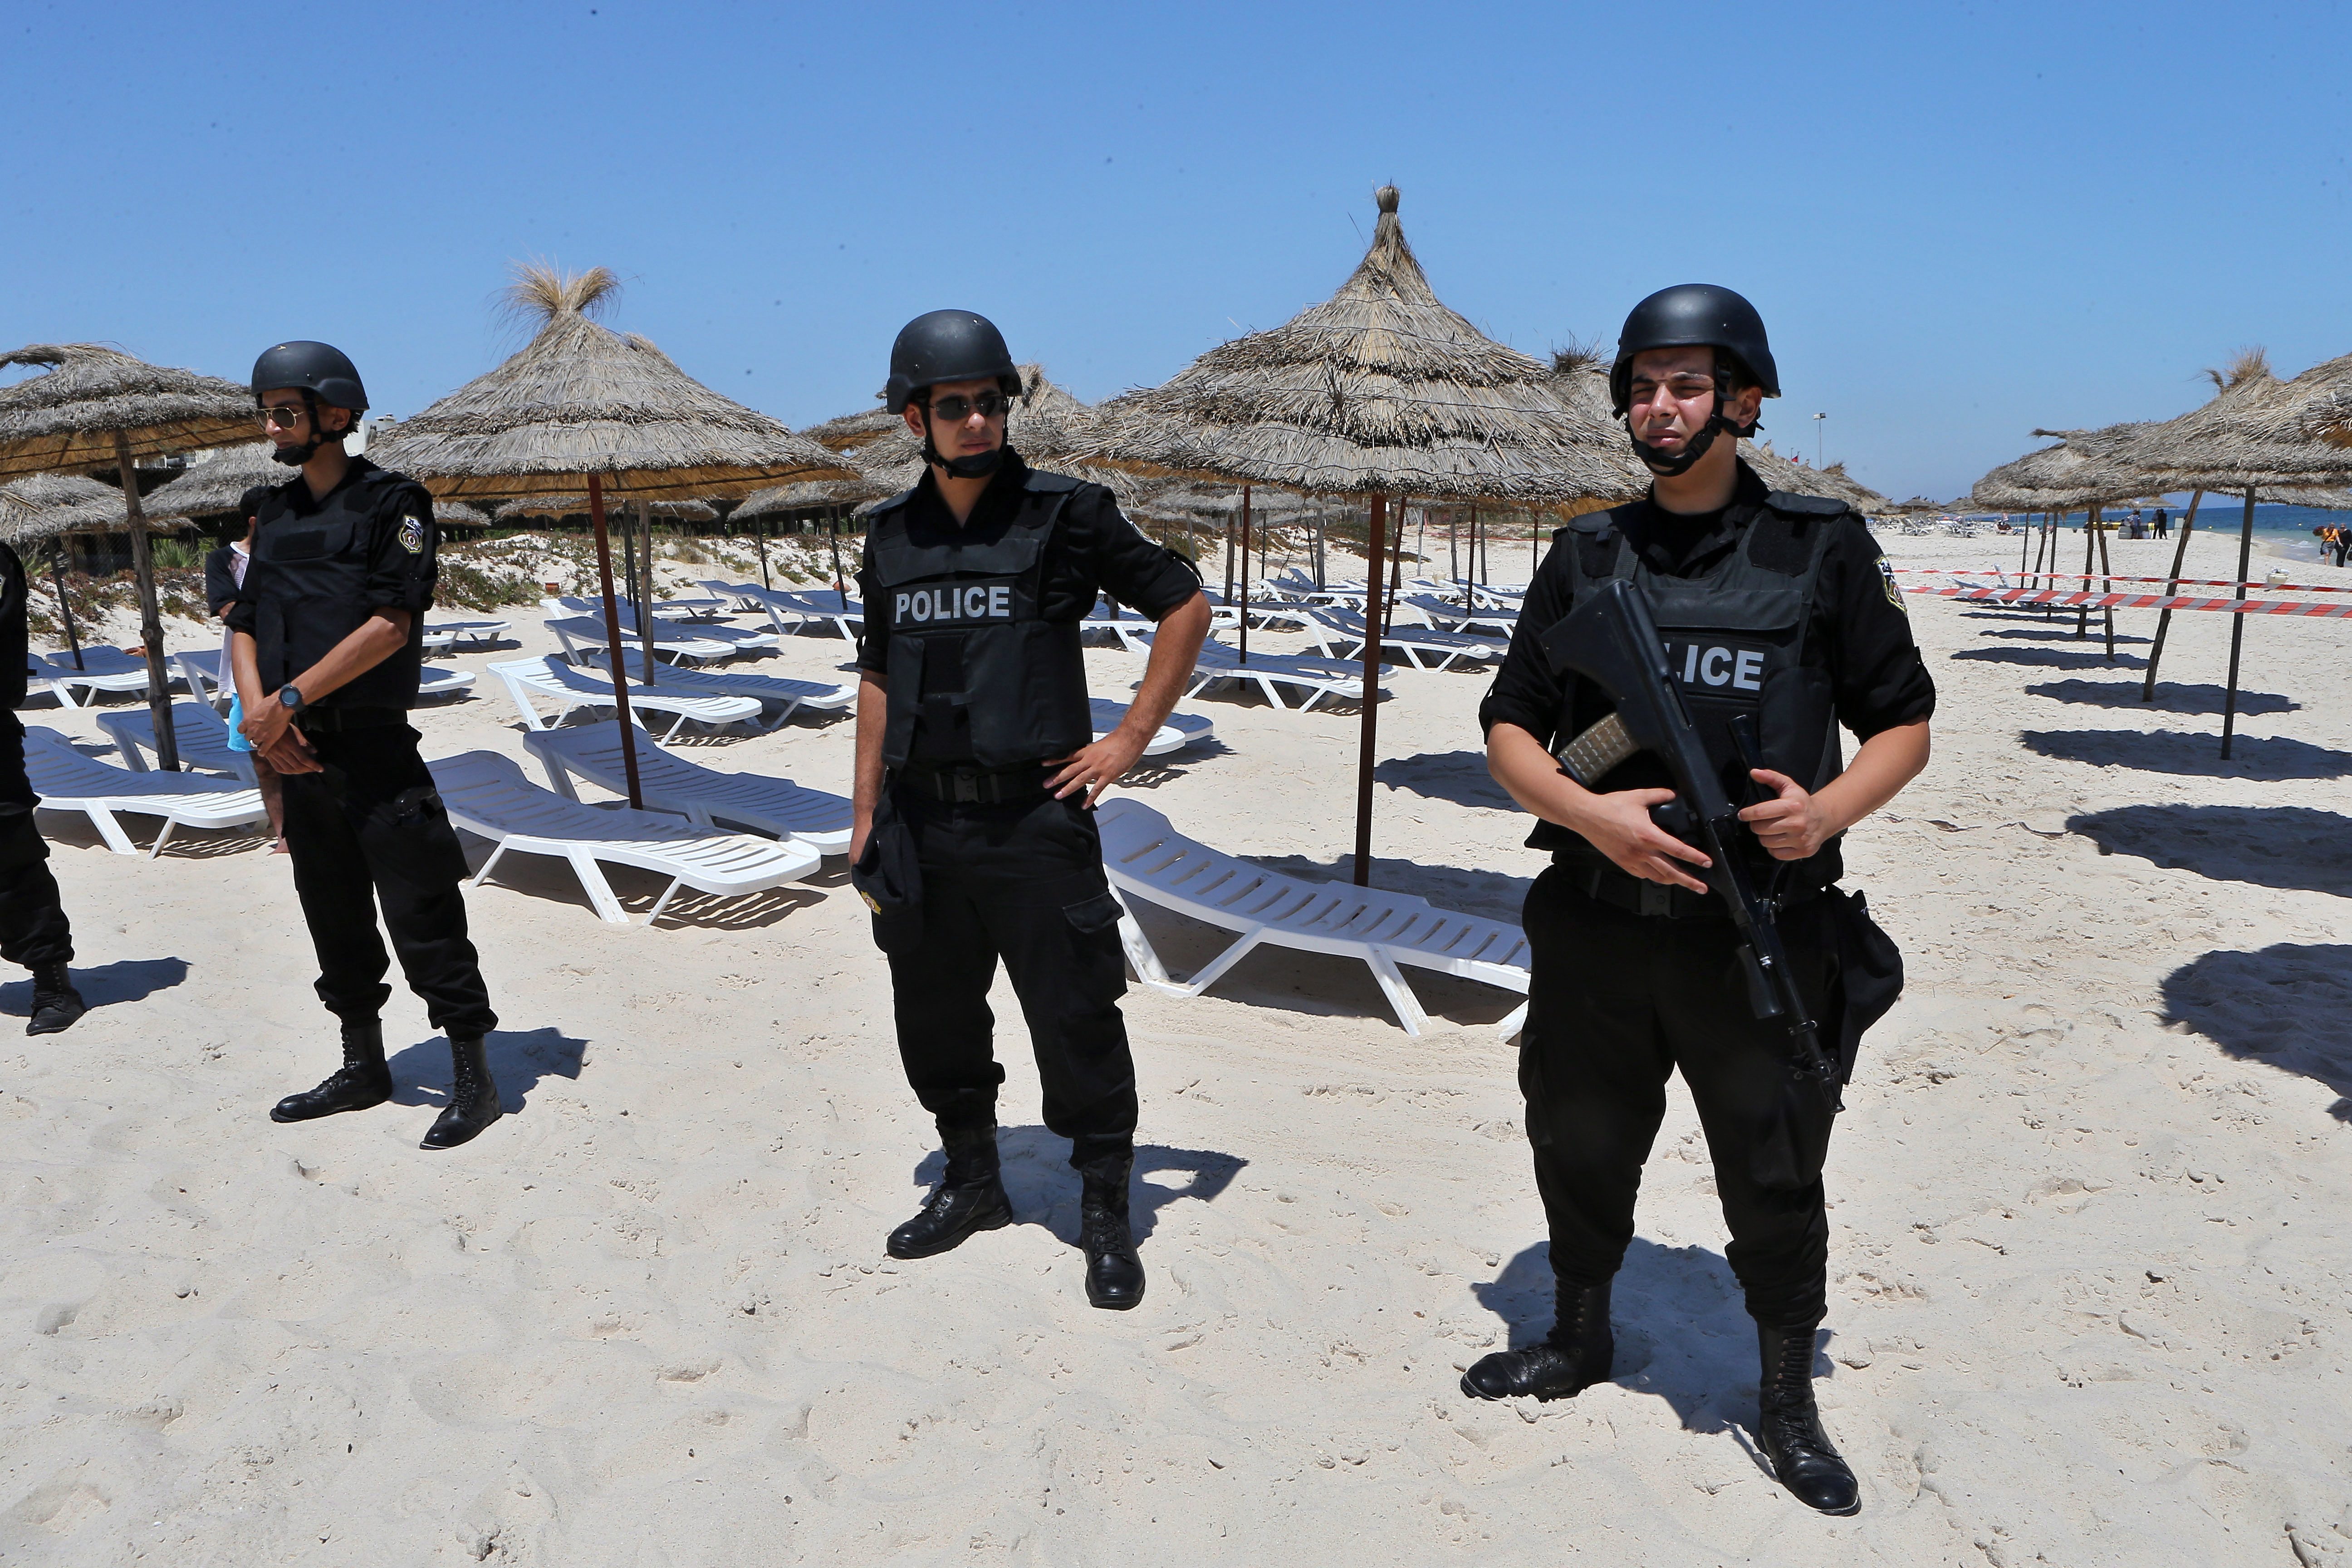 TRAGEDY. Tunisian security services stand guard during a July 3, 2015 memorial ceremony for the victims of the June 26, 2015 terror attack on a beach in Tunisia. File photo by Mohamed Messara/EPA 